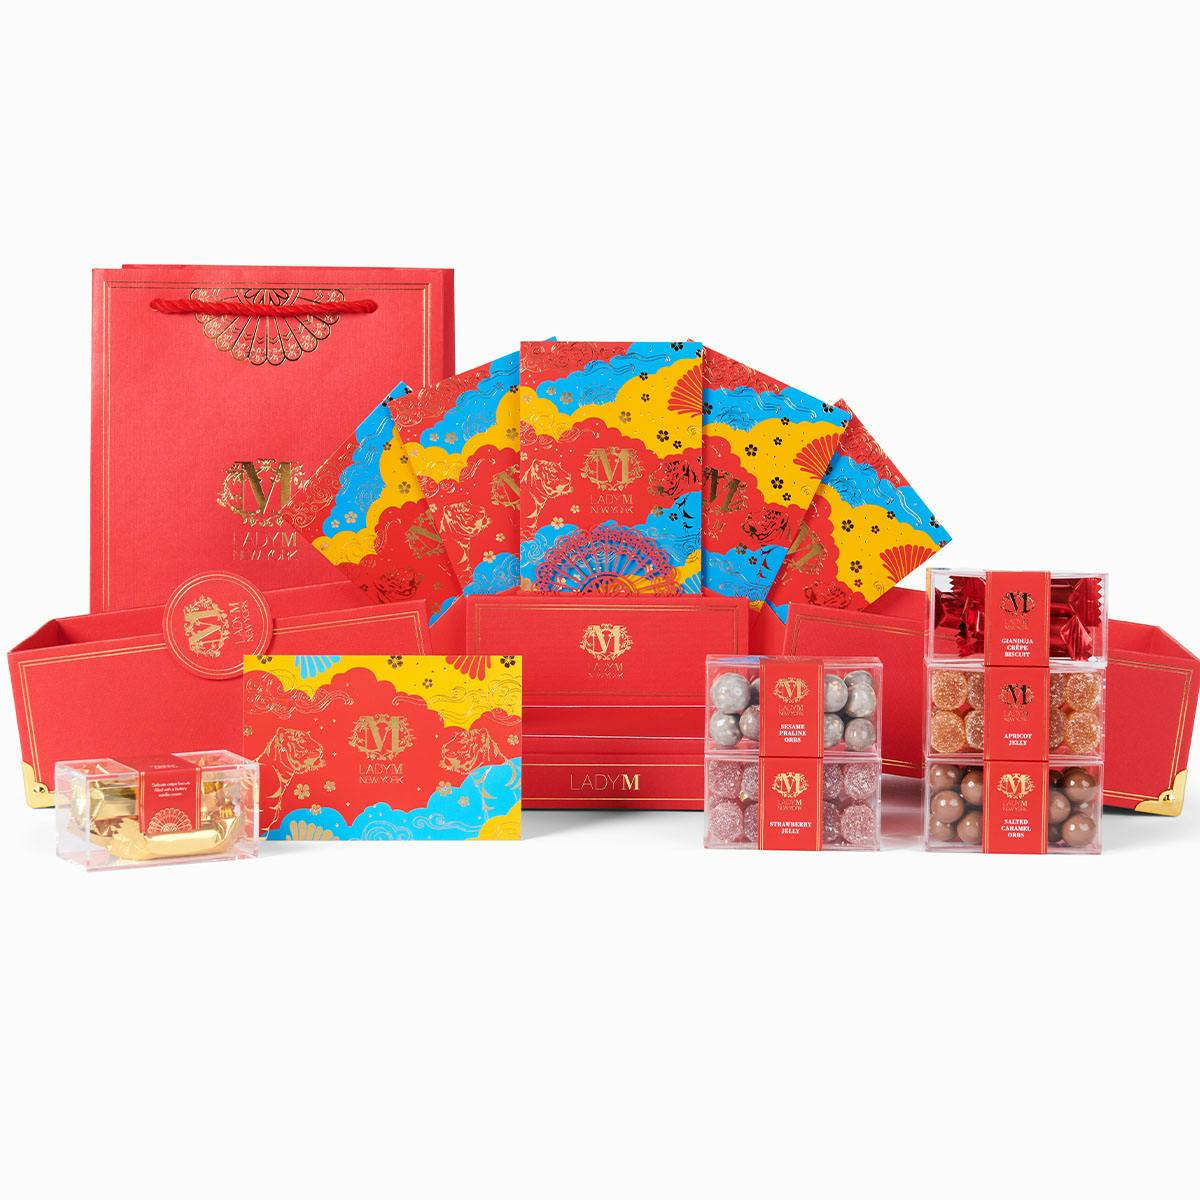 Lunar New Year Gifts for the Year of the Tiger